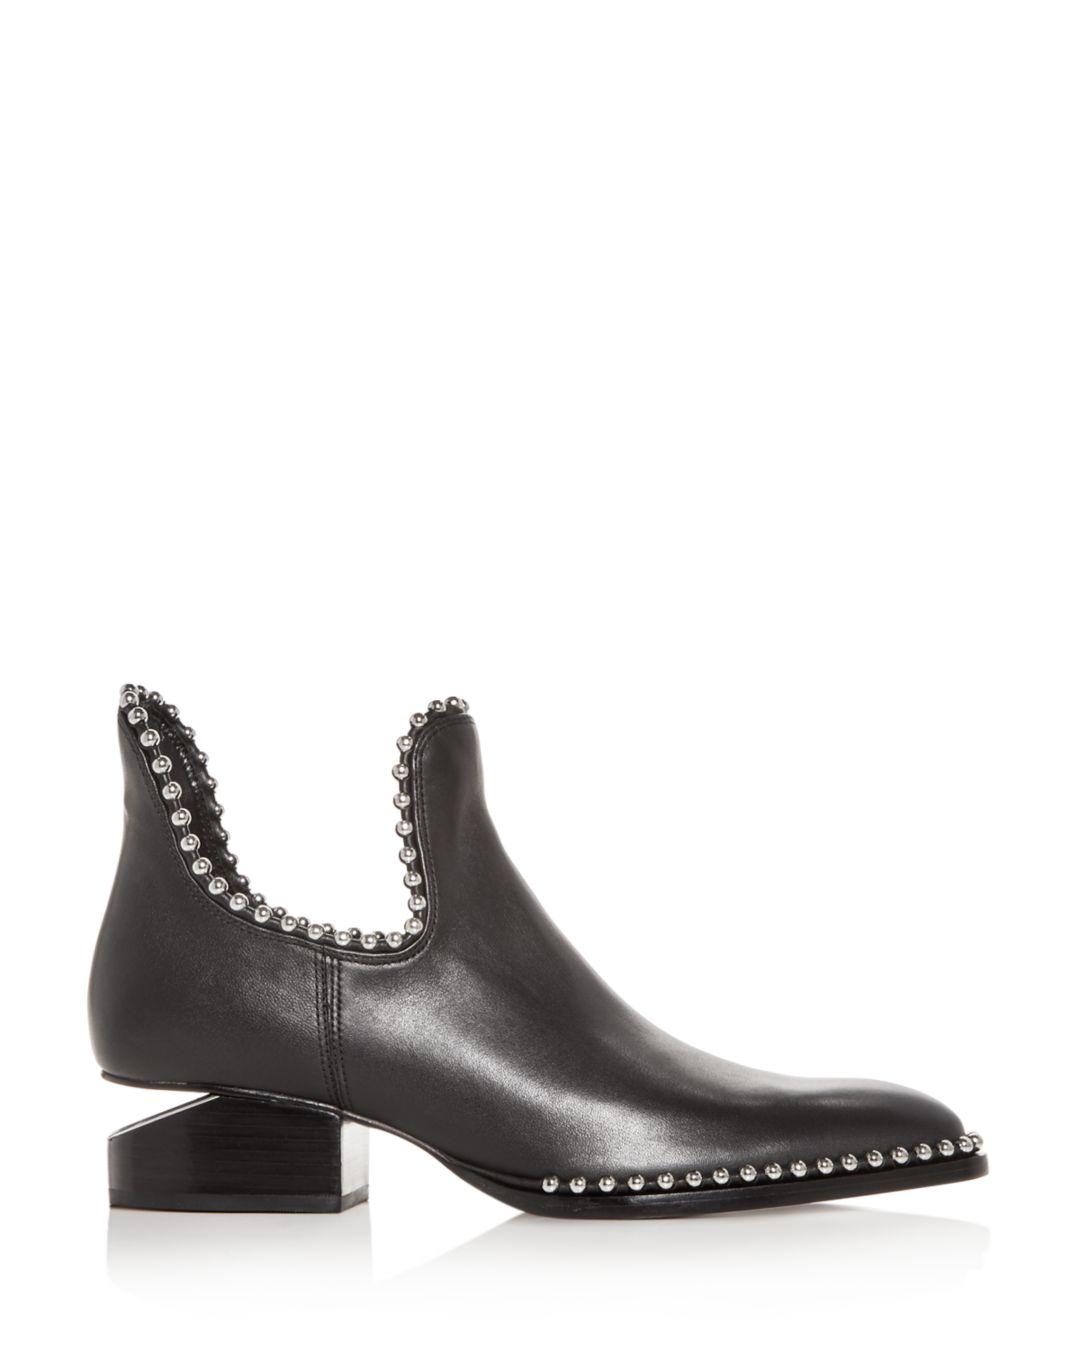 India Blijven Verouderd Alexander Wang Kori Cutout Studded Leather Ankle Boots in Black | Lyst